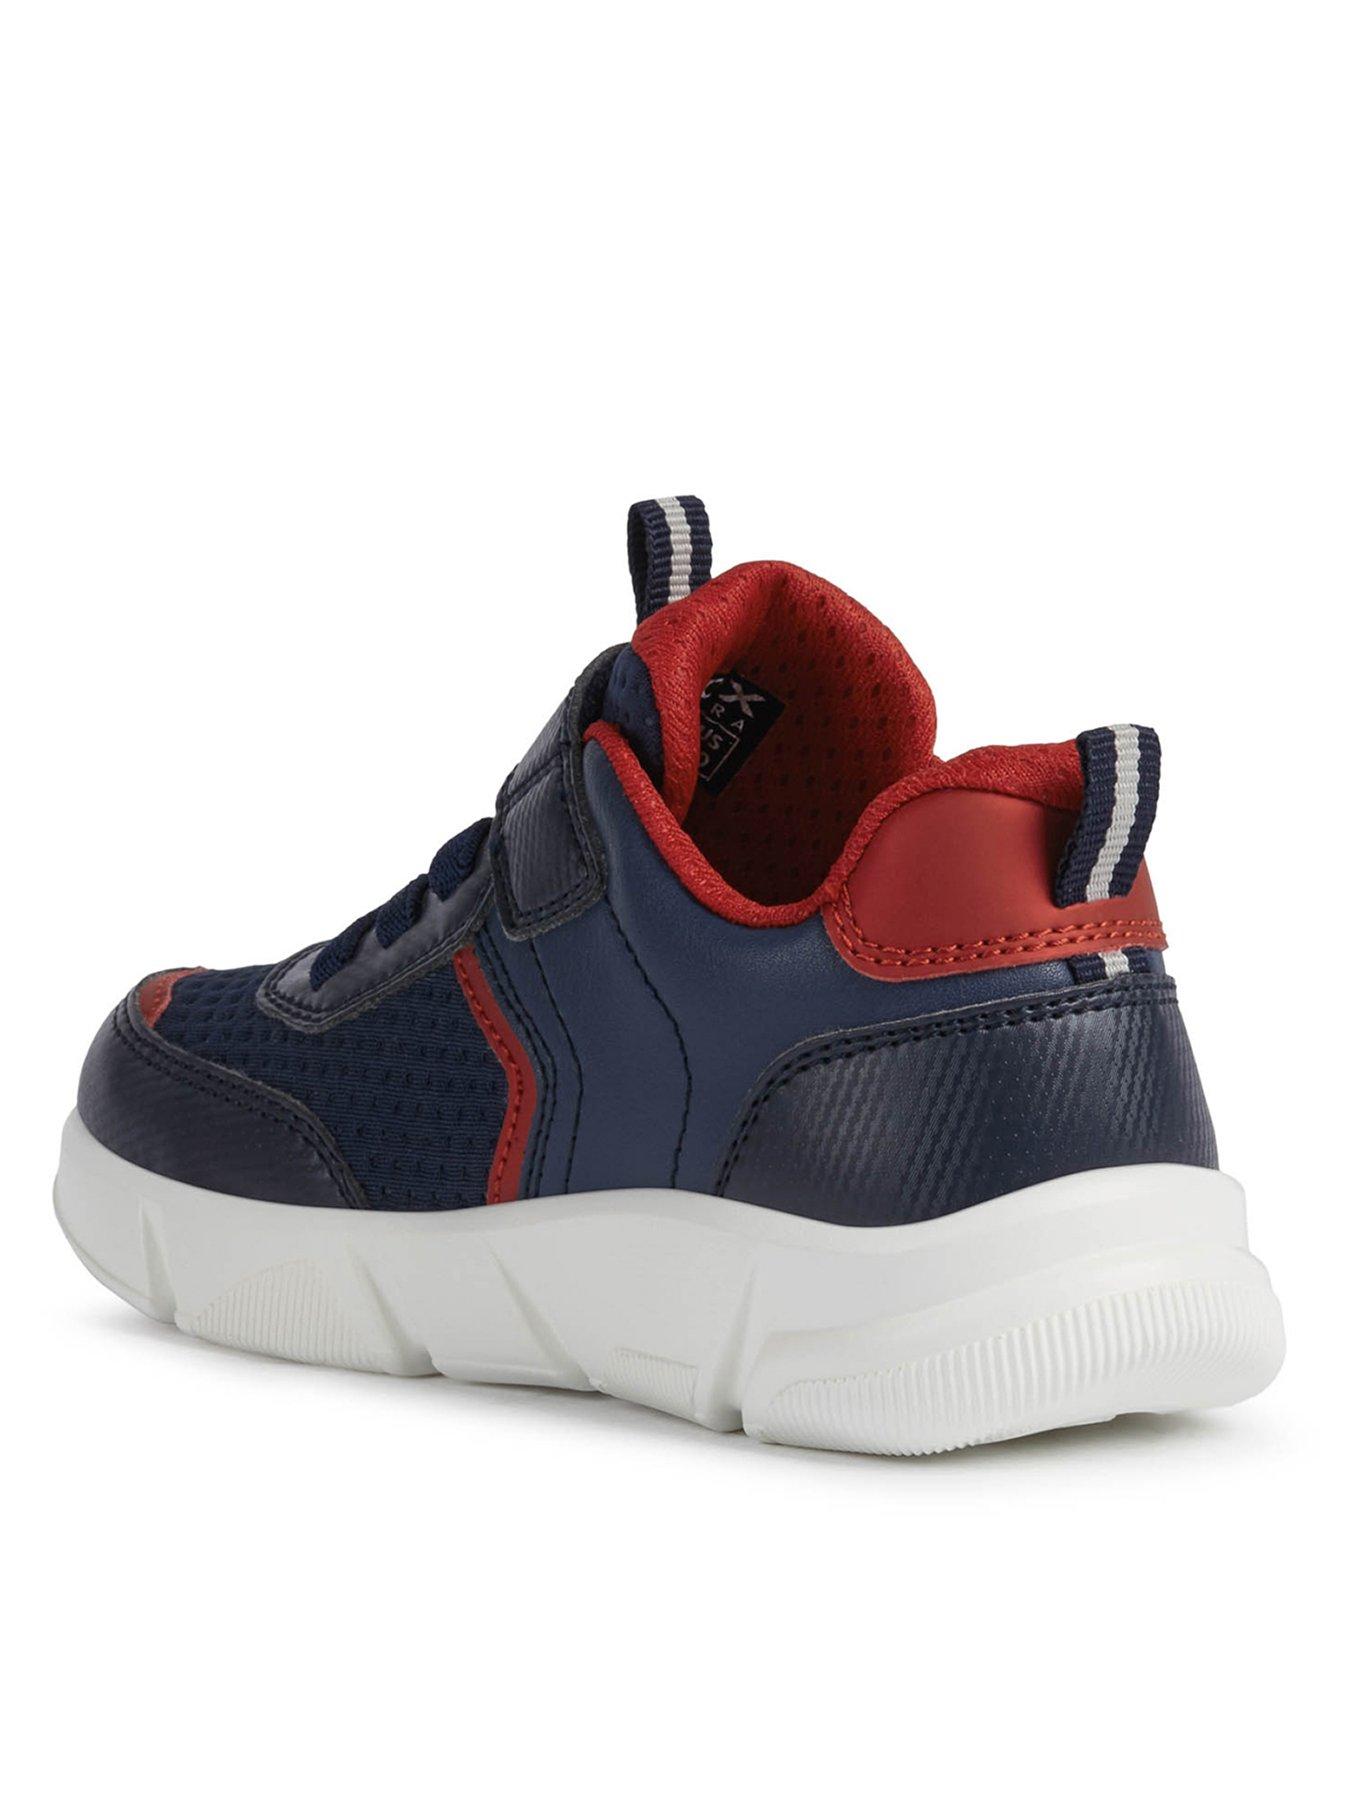 Trainers April Boys Trainer - Navy/Red